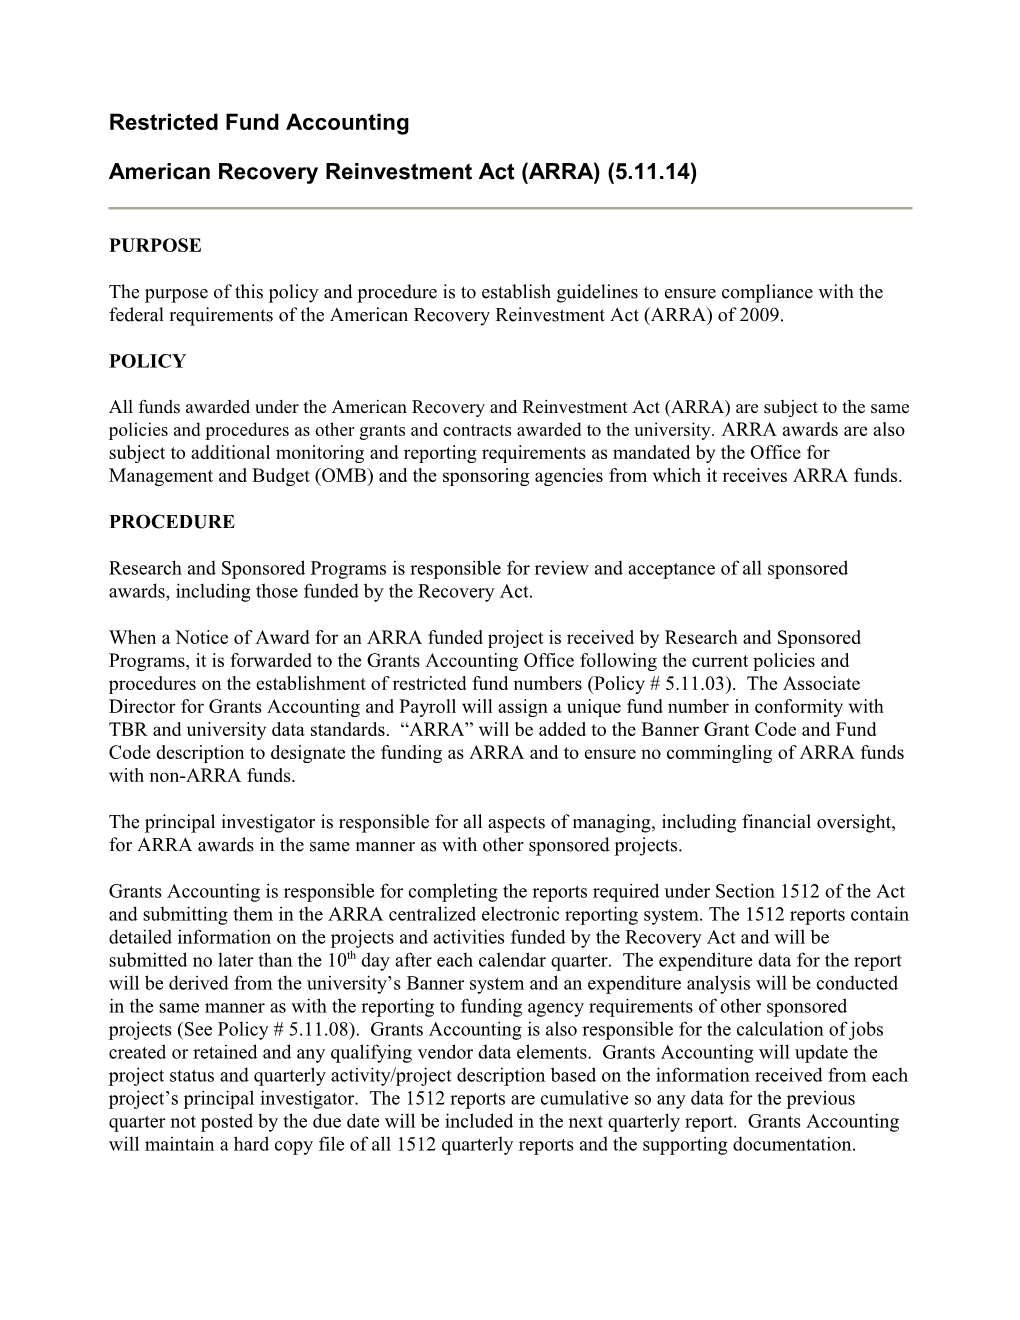 American Recovery Reinvestment Act (ARRA) (5.11.14)